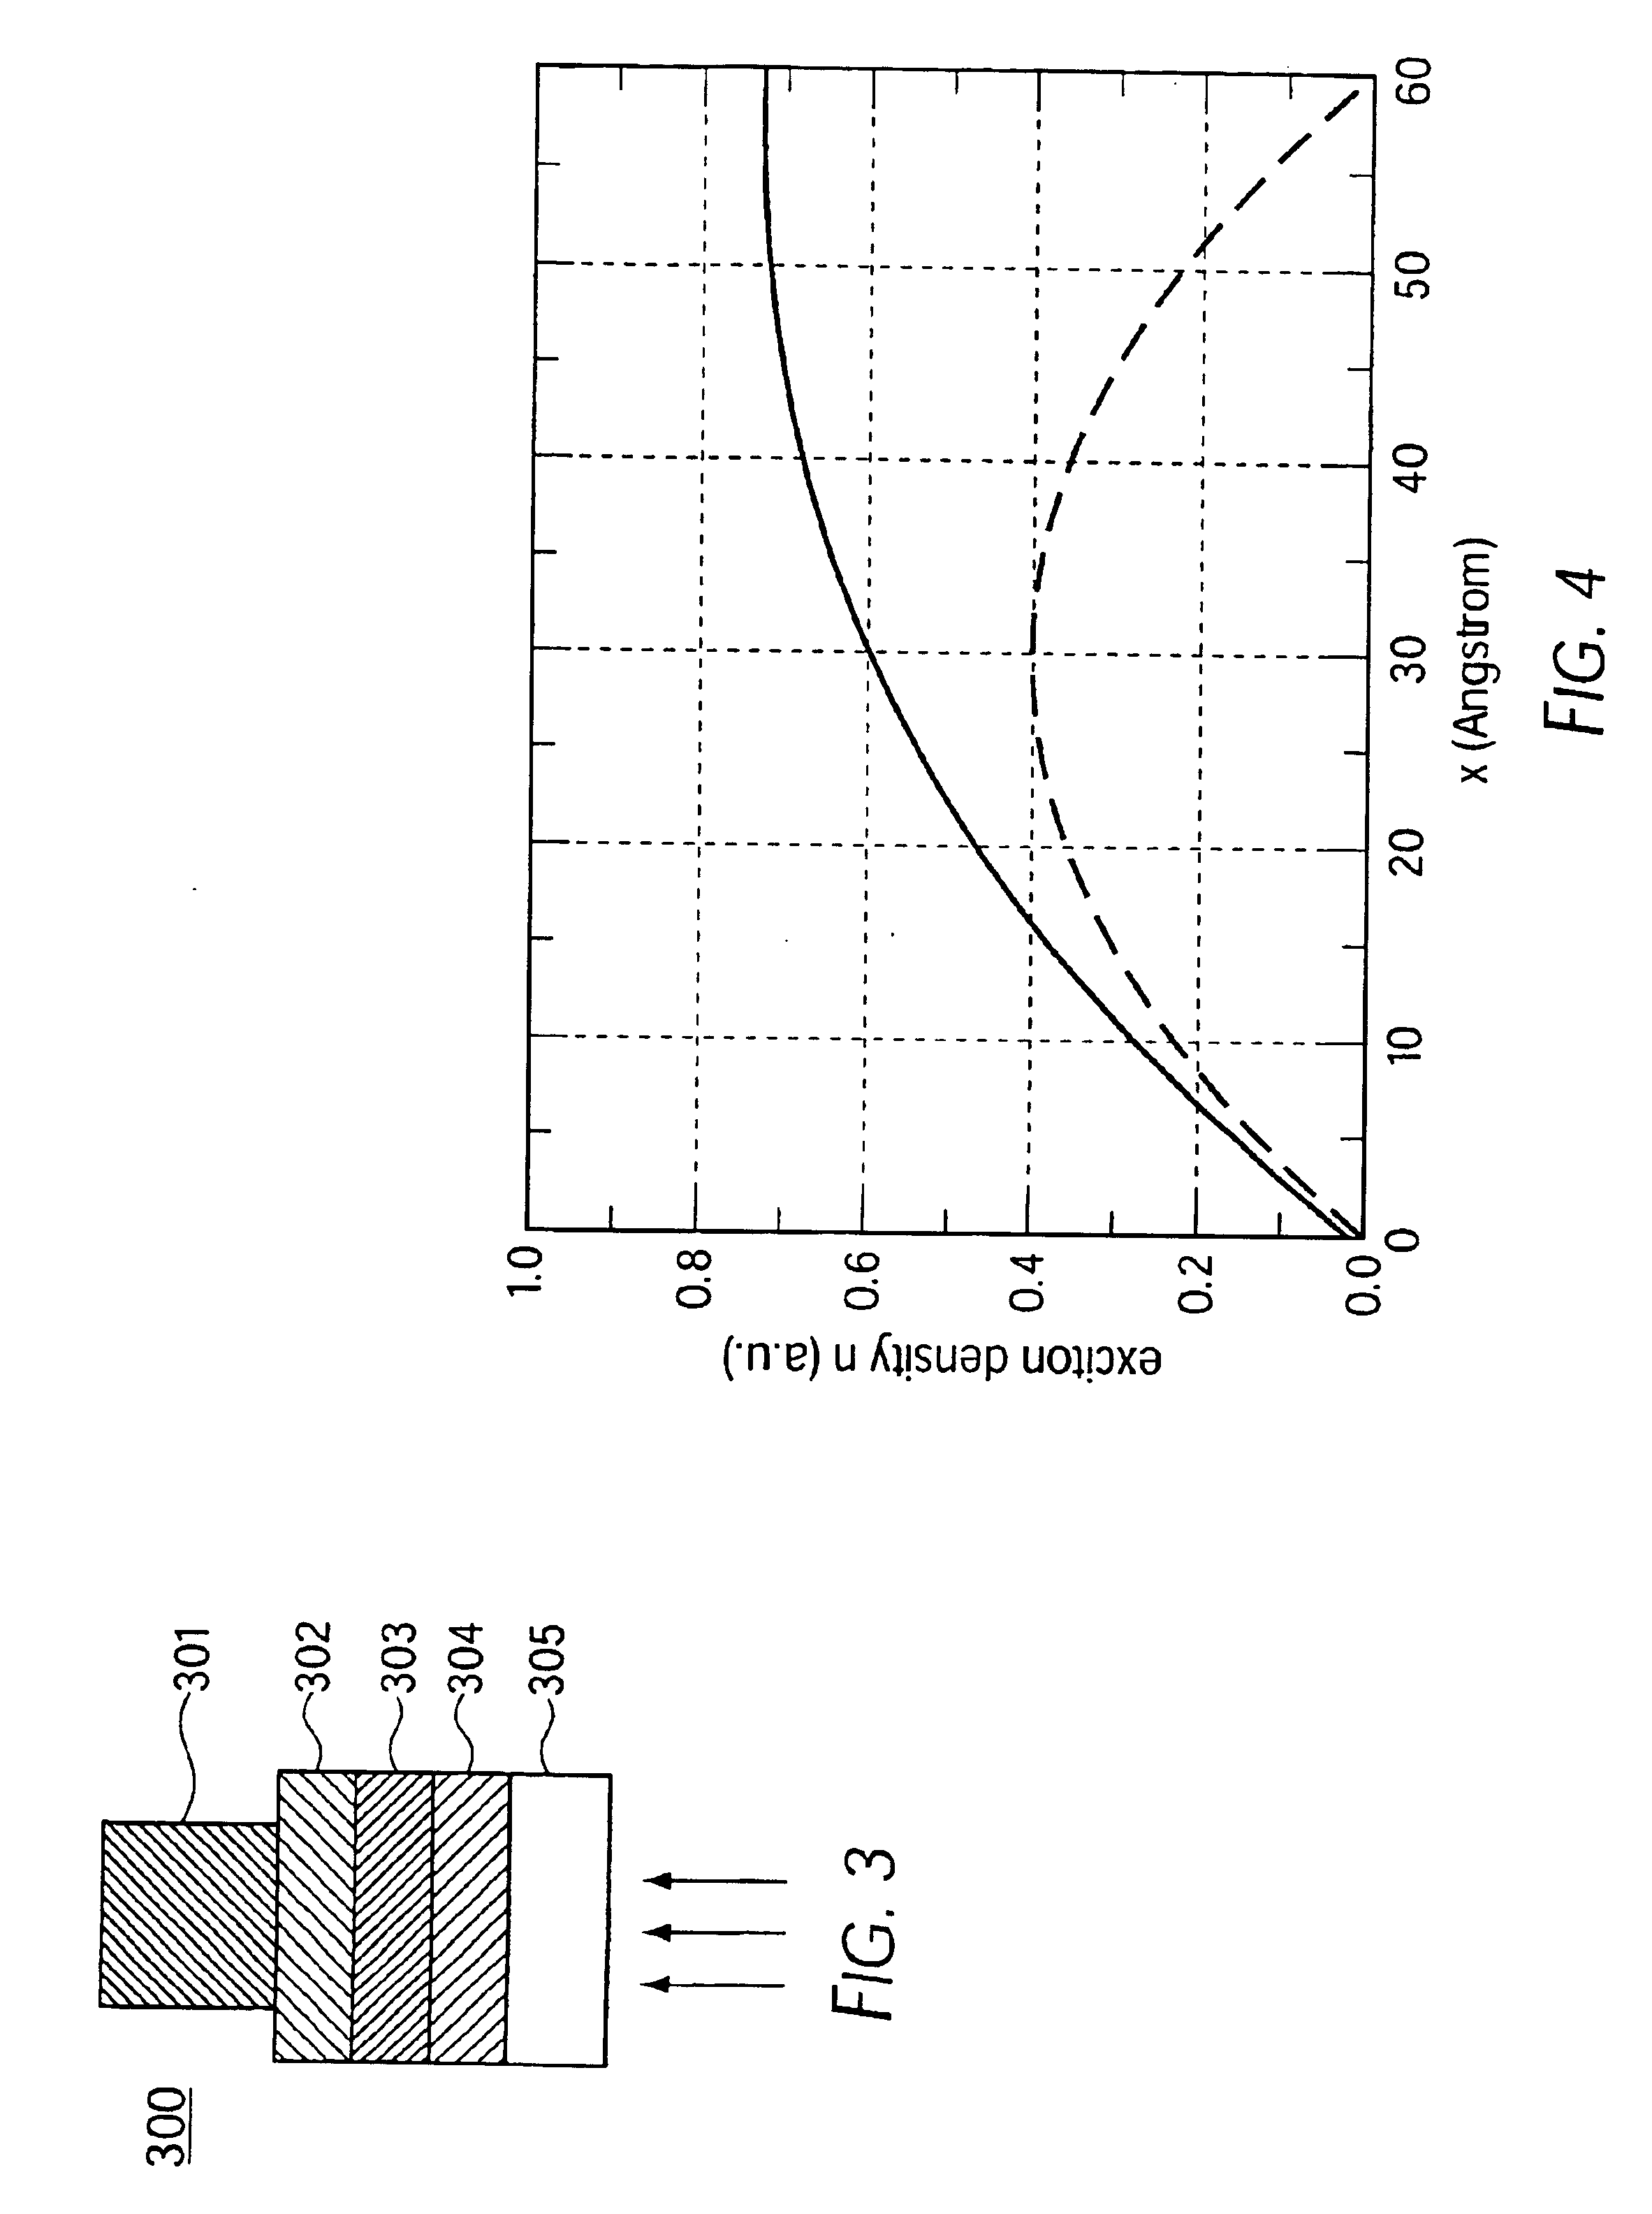 Method of fabricating an organic photosensitive optoelectronic device with an exciton blocking layer